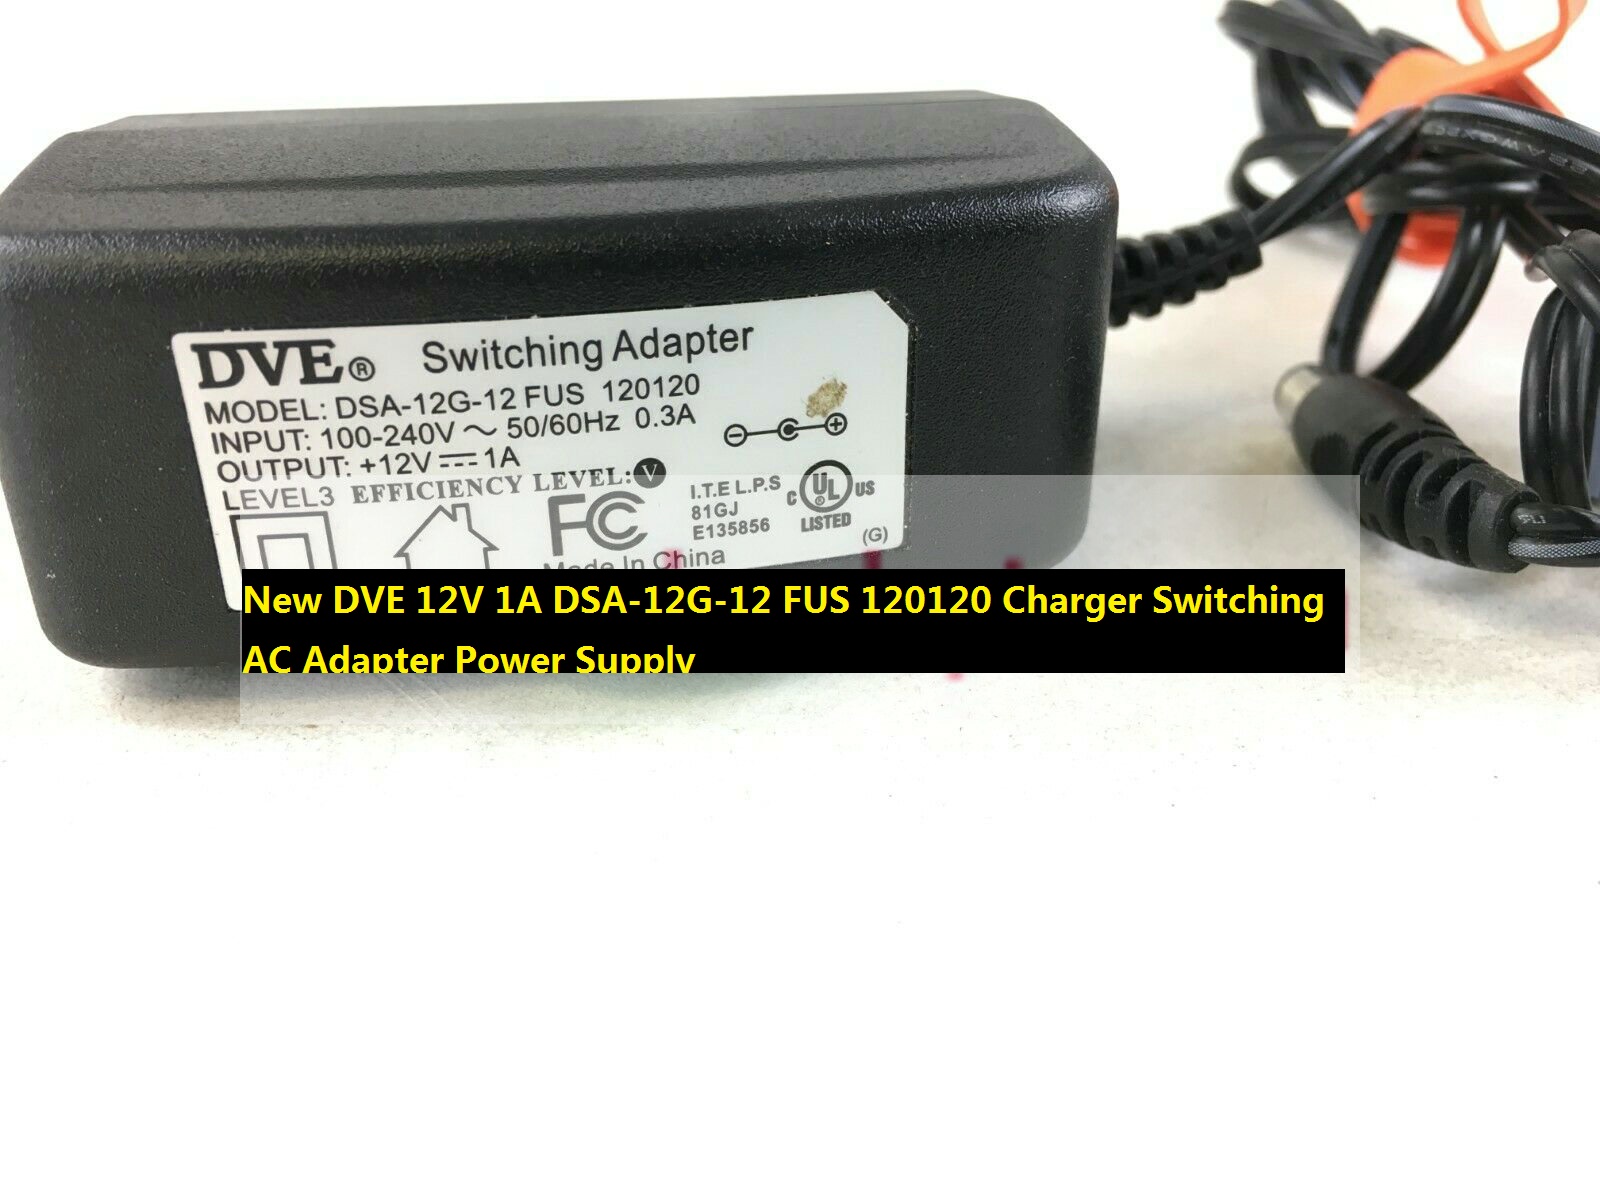 *Brand NEW* DVE 12V 1A AC Adapter DSA-12G-12 FUS 120120 Charger Switching Power Supply